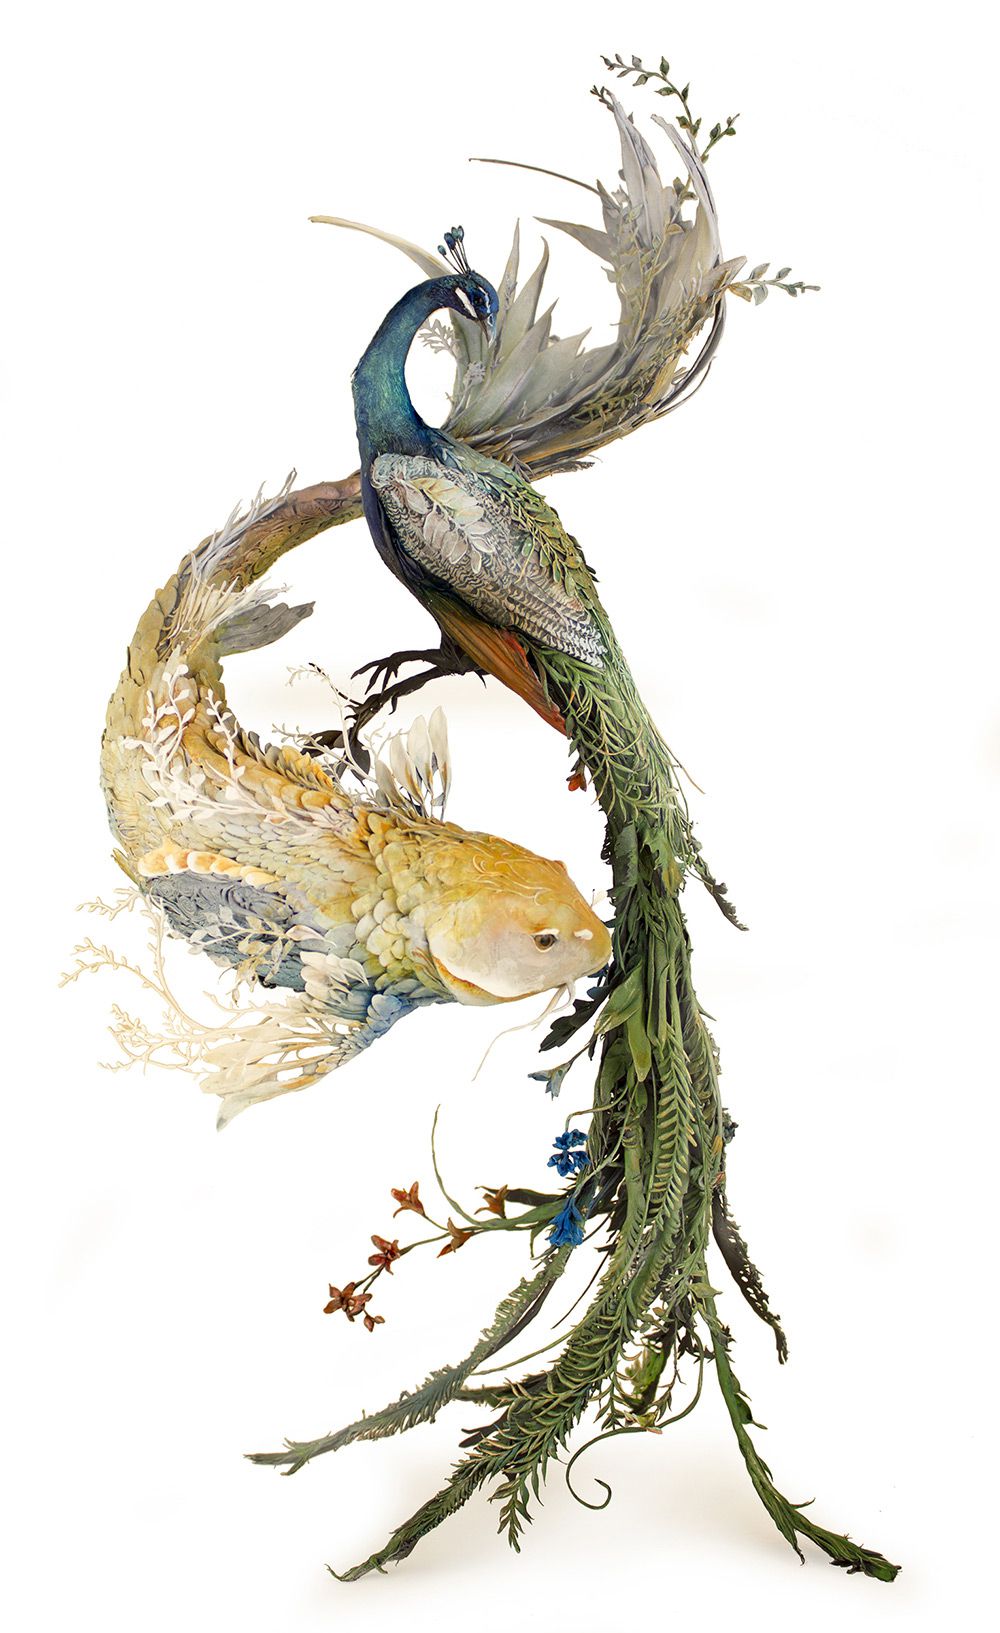 Lush And Surreal Sculptures Of Symbiotic Animals By Ellen Jewett 28